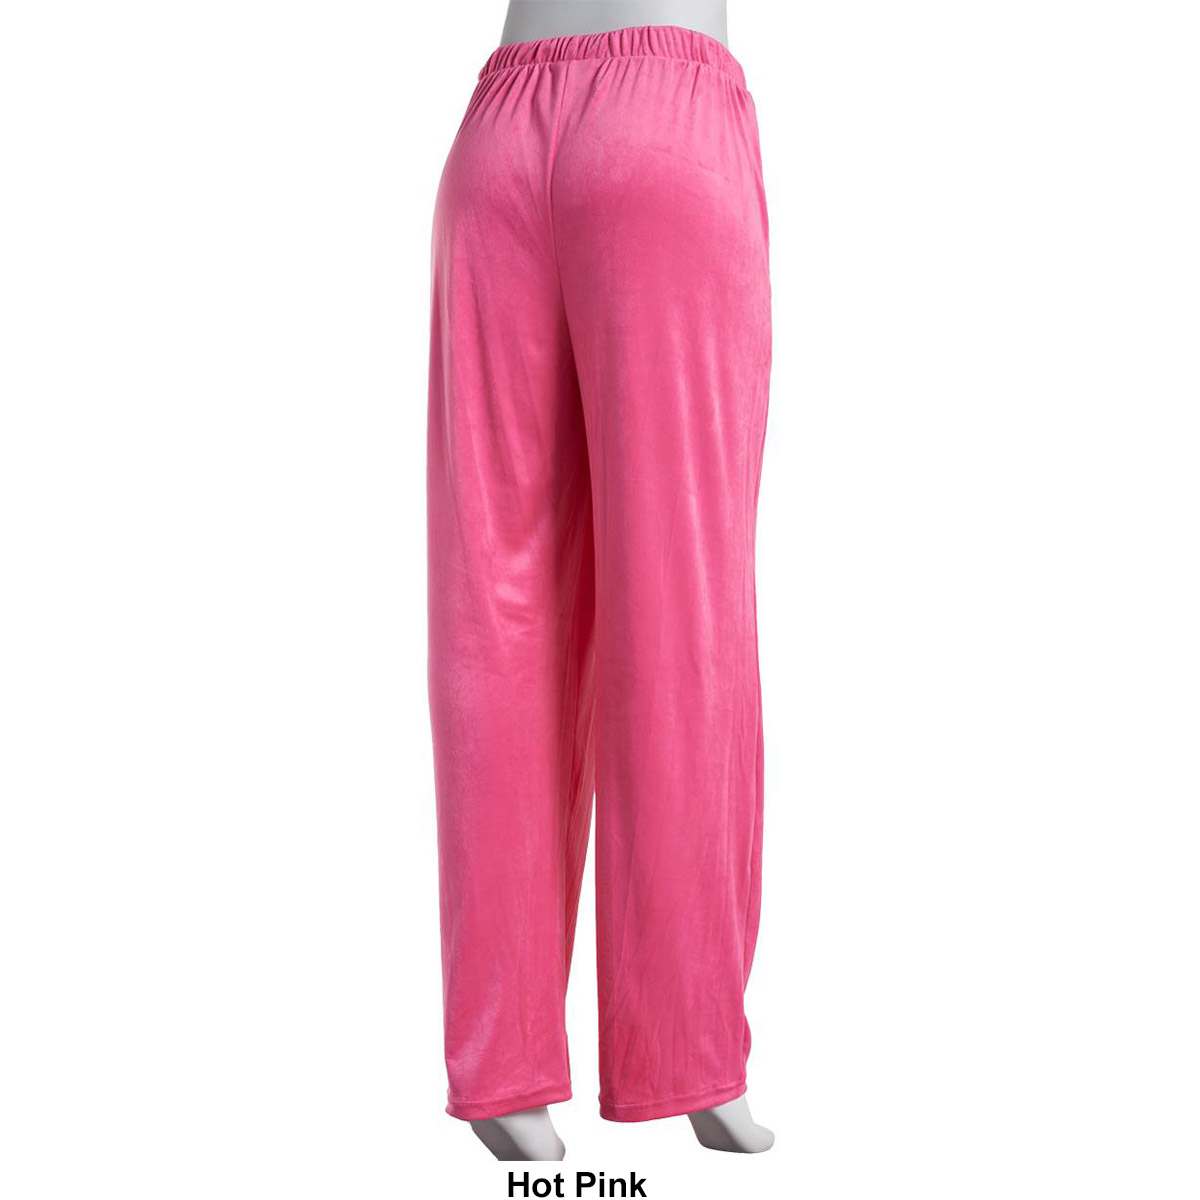 Plus Size Goodnight Kiss Solid Silky Velour Pajama Pants